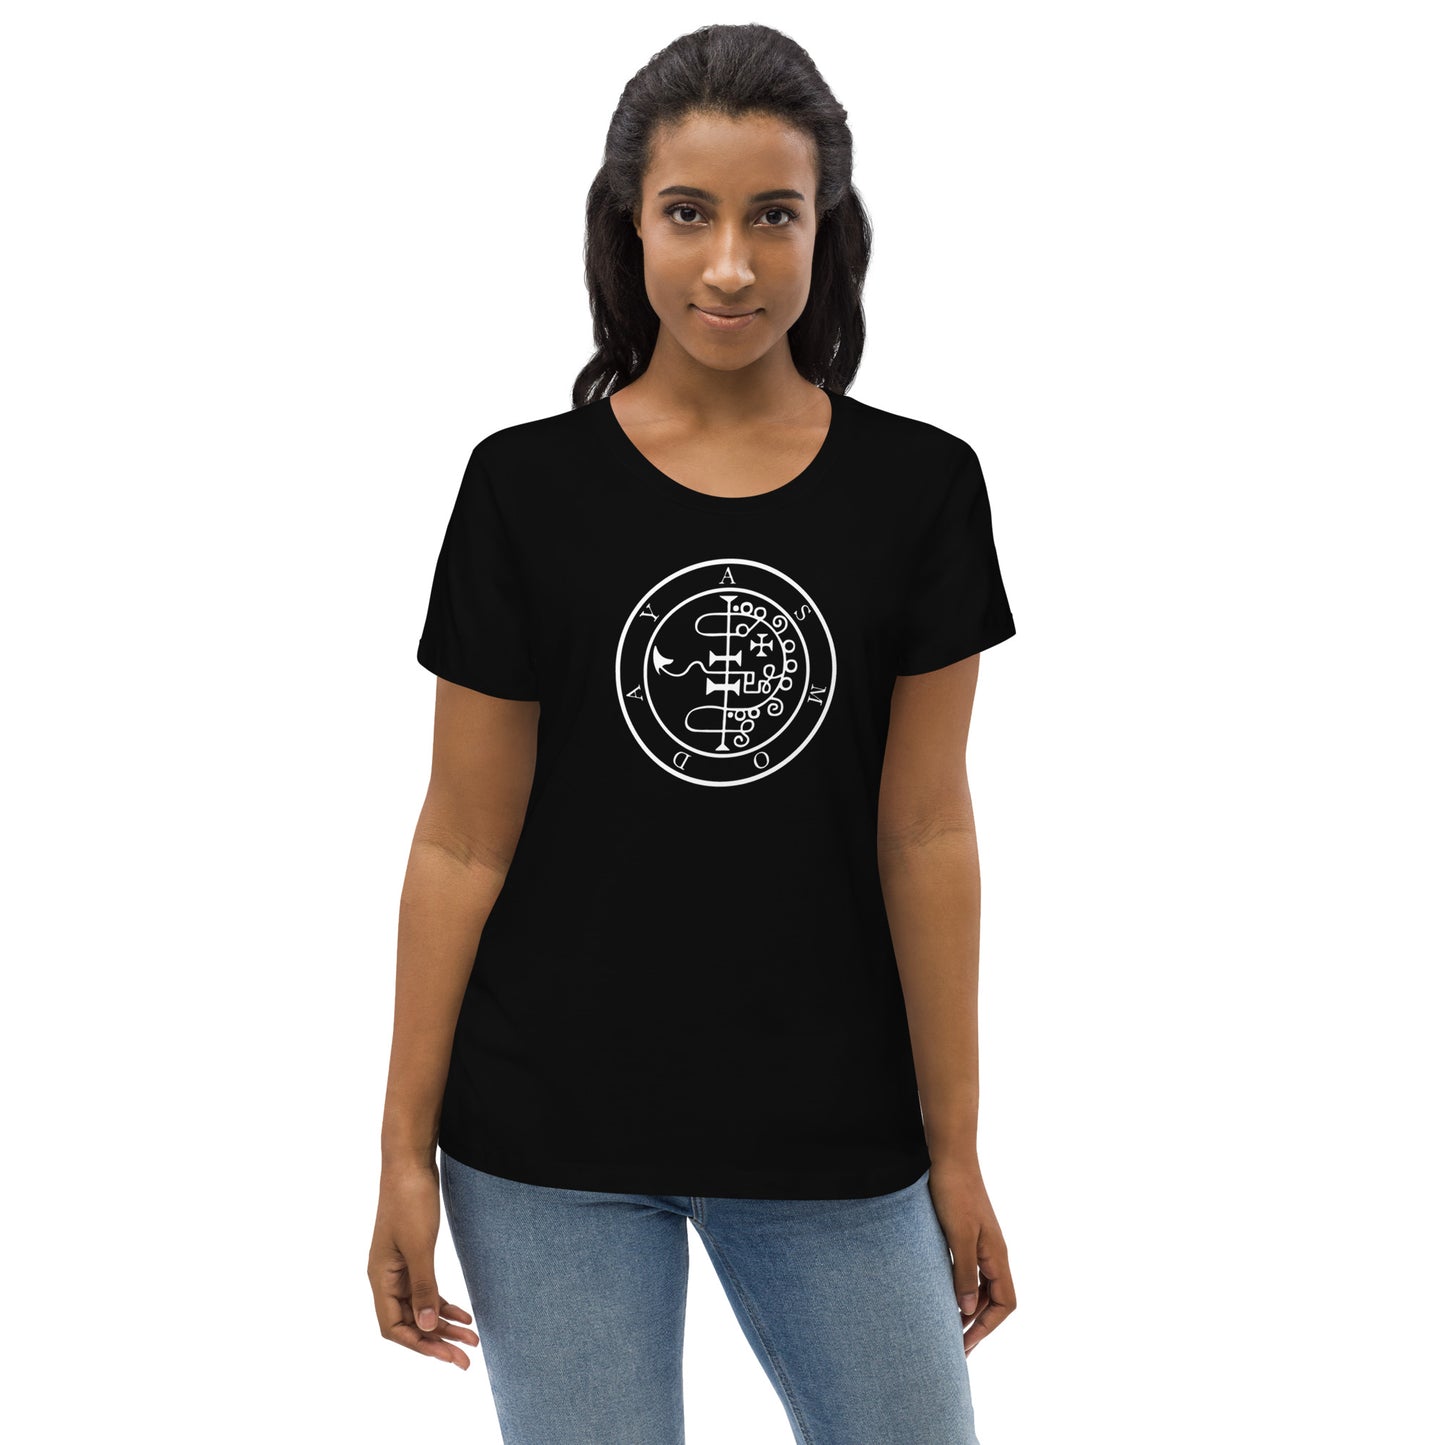 Women's Asmoday fitted eco tee